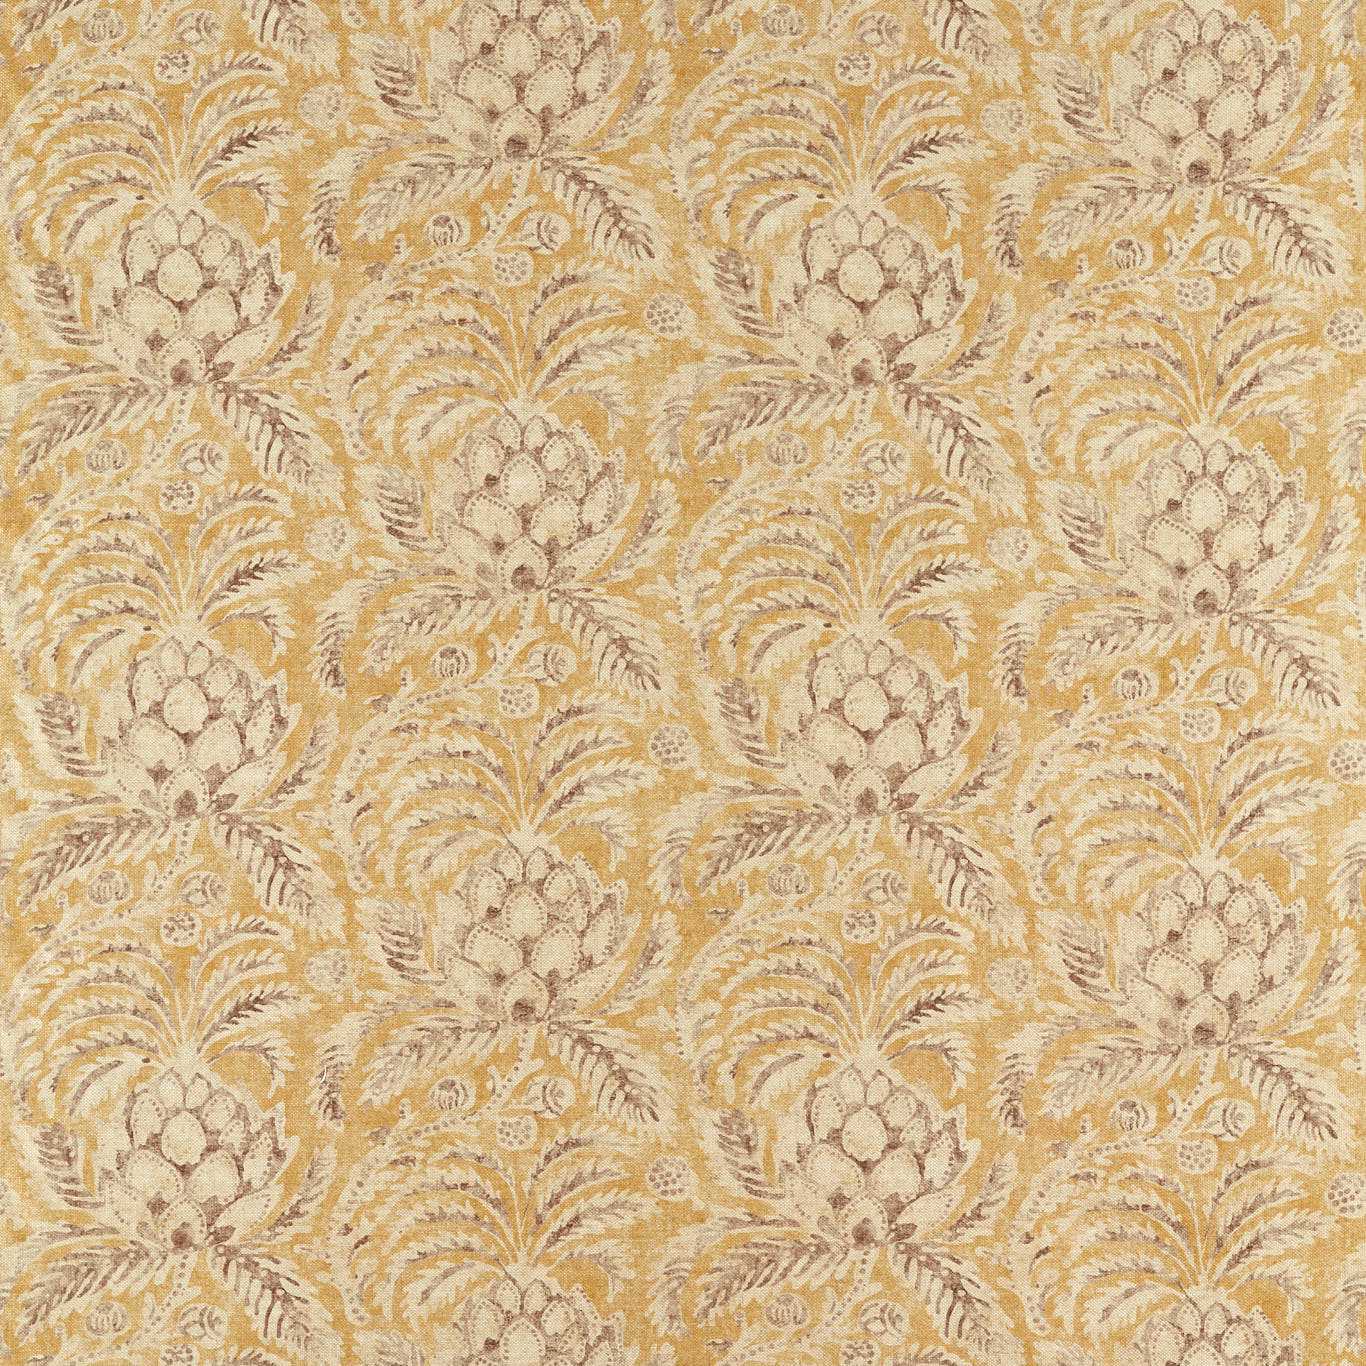 Pina de Indes Tiger's Eye Fabric by ZOF